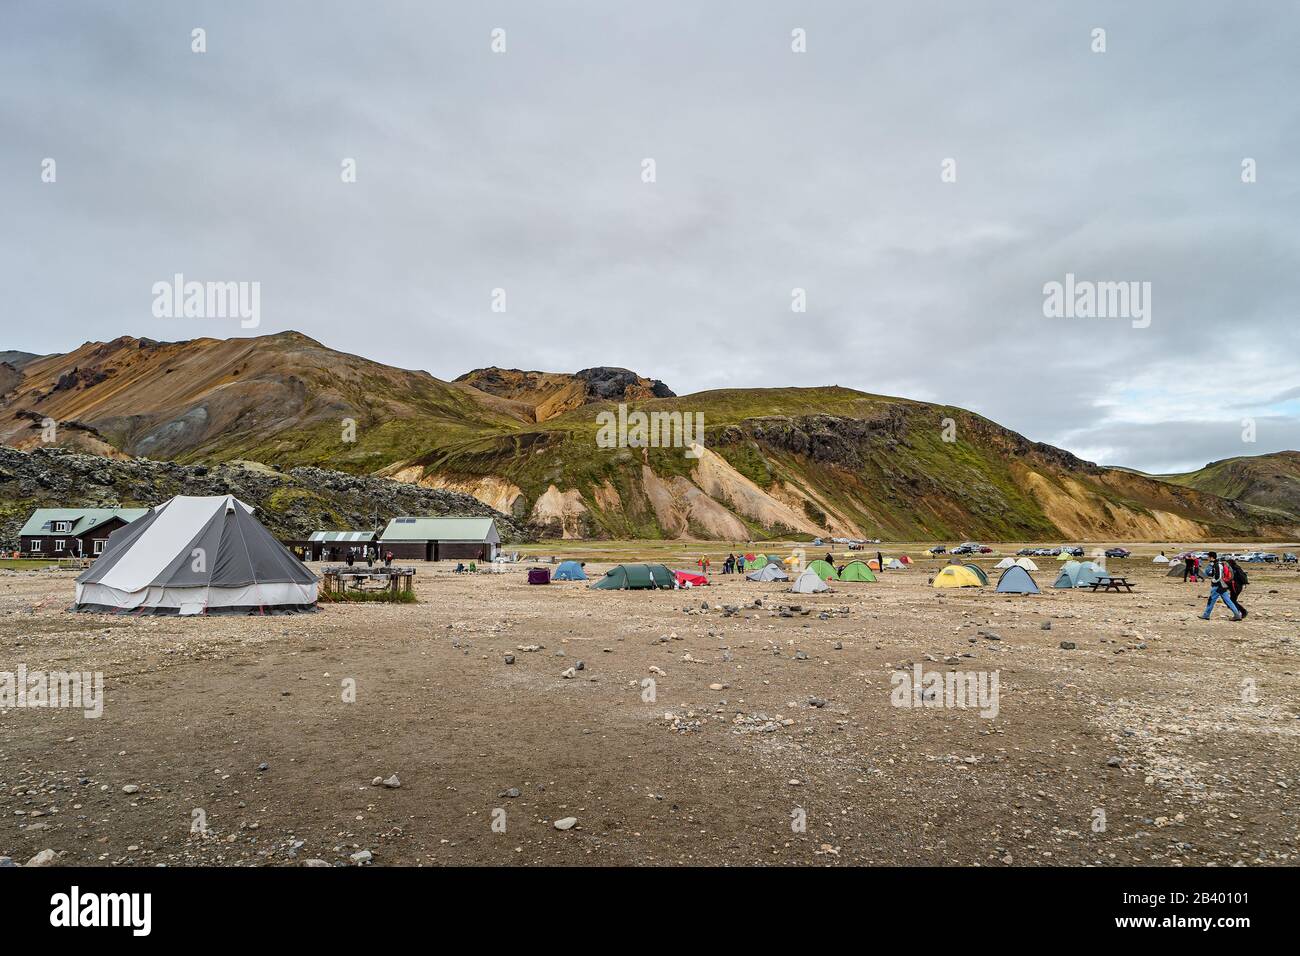 Camping site at colorful rainbow like rhyolite volcanic mountains Landmannalaugar, at Highlands in Iceland Stock Photo